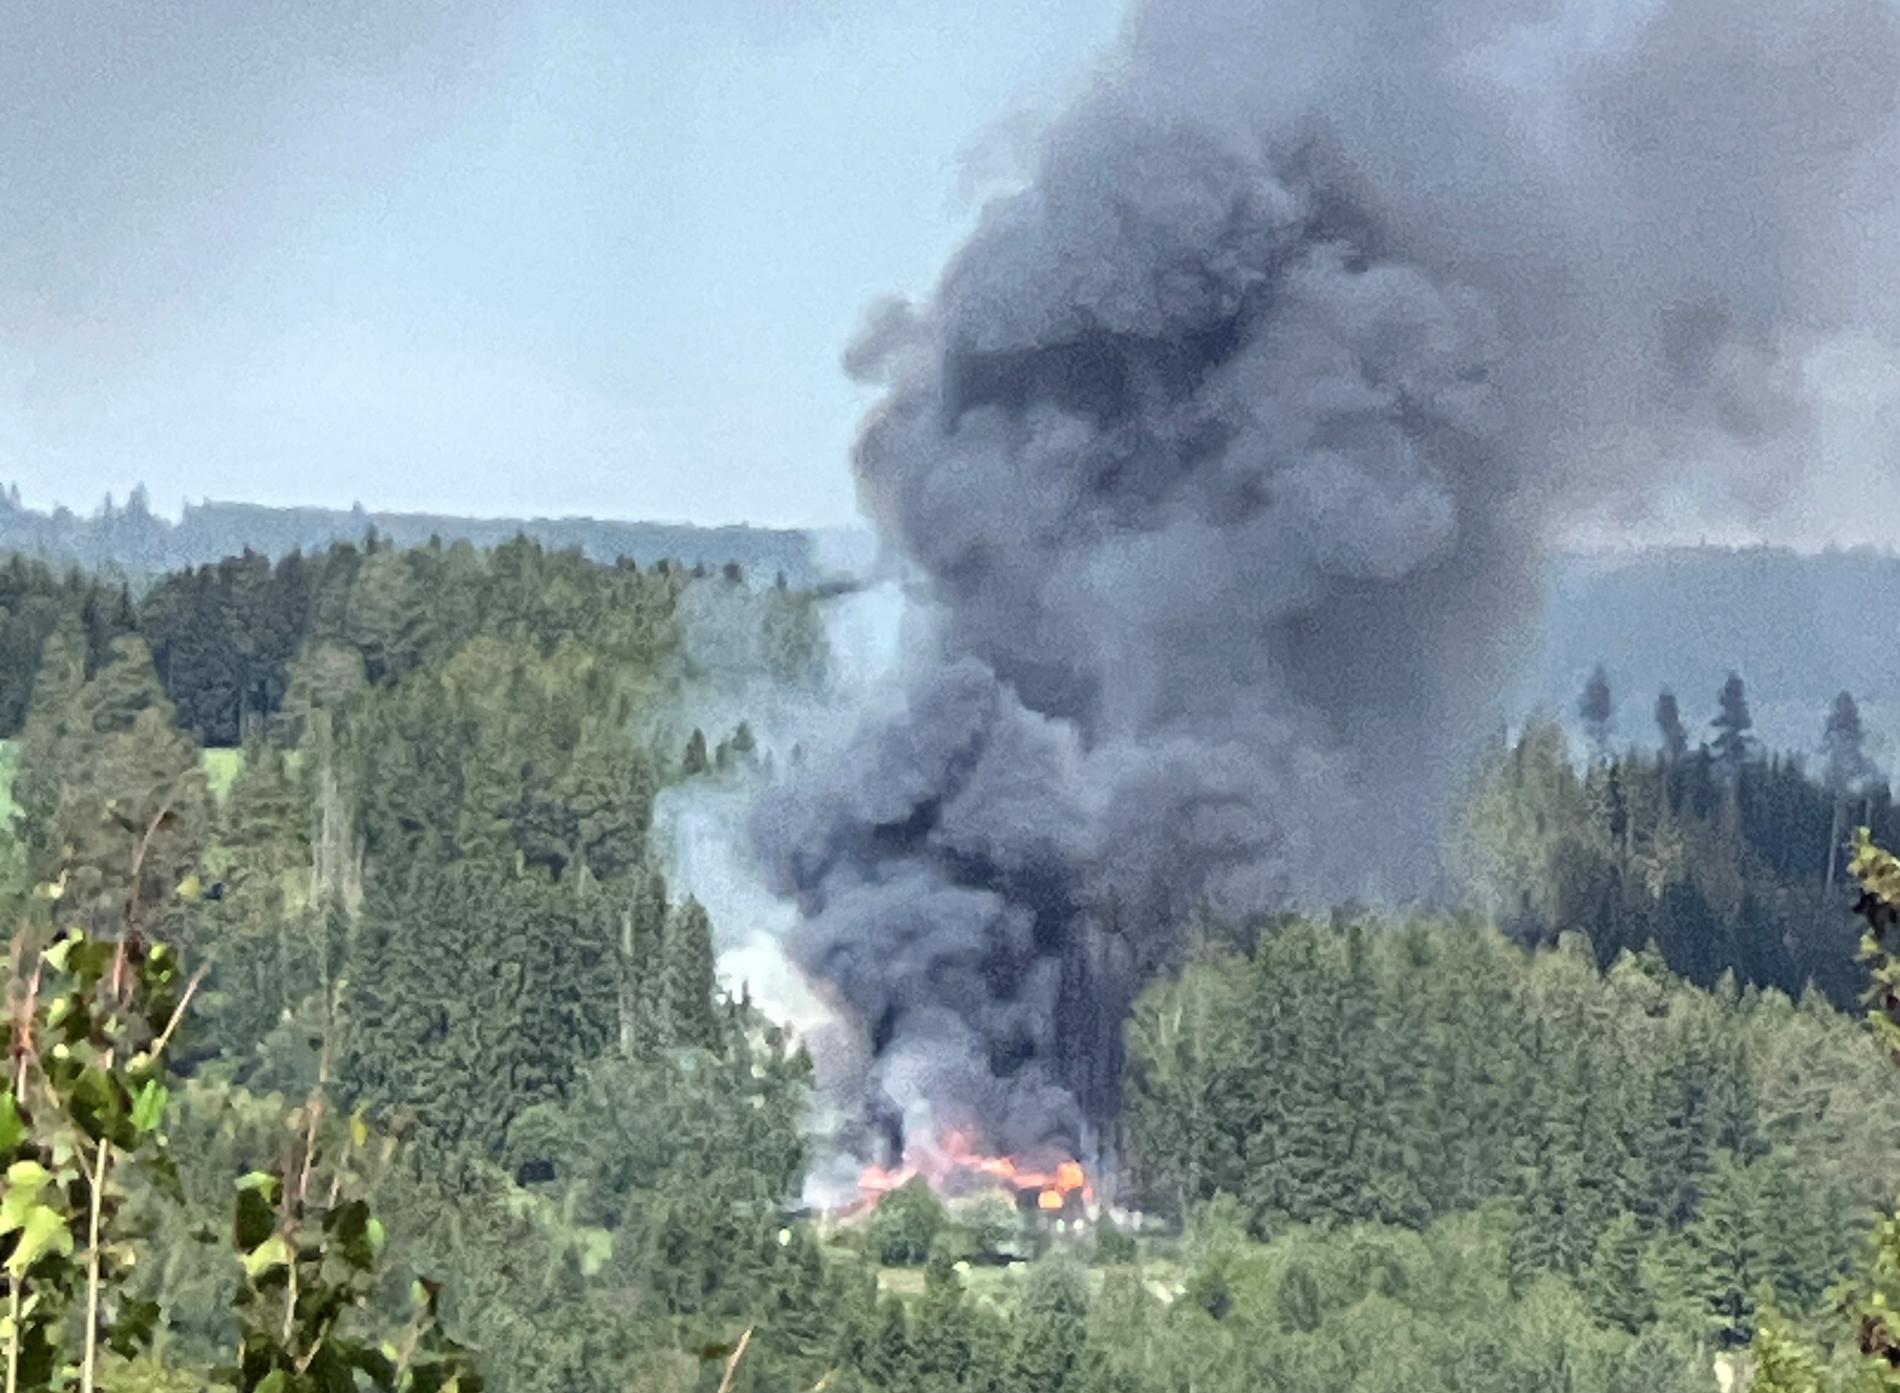 House fire spread to forest area – not contained